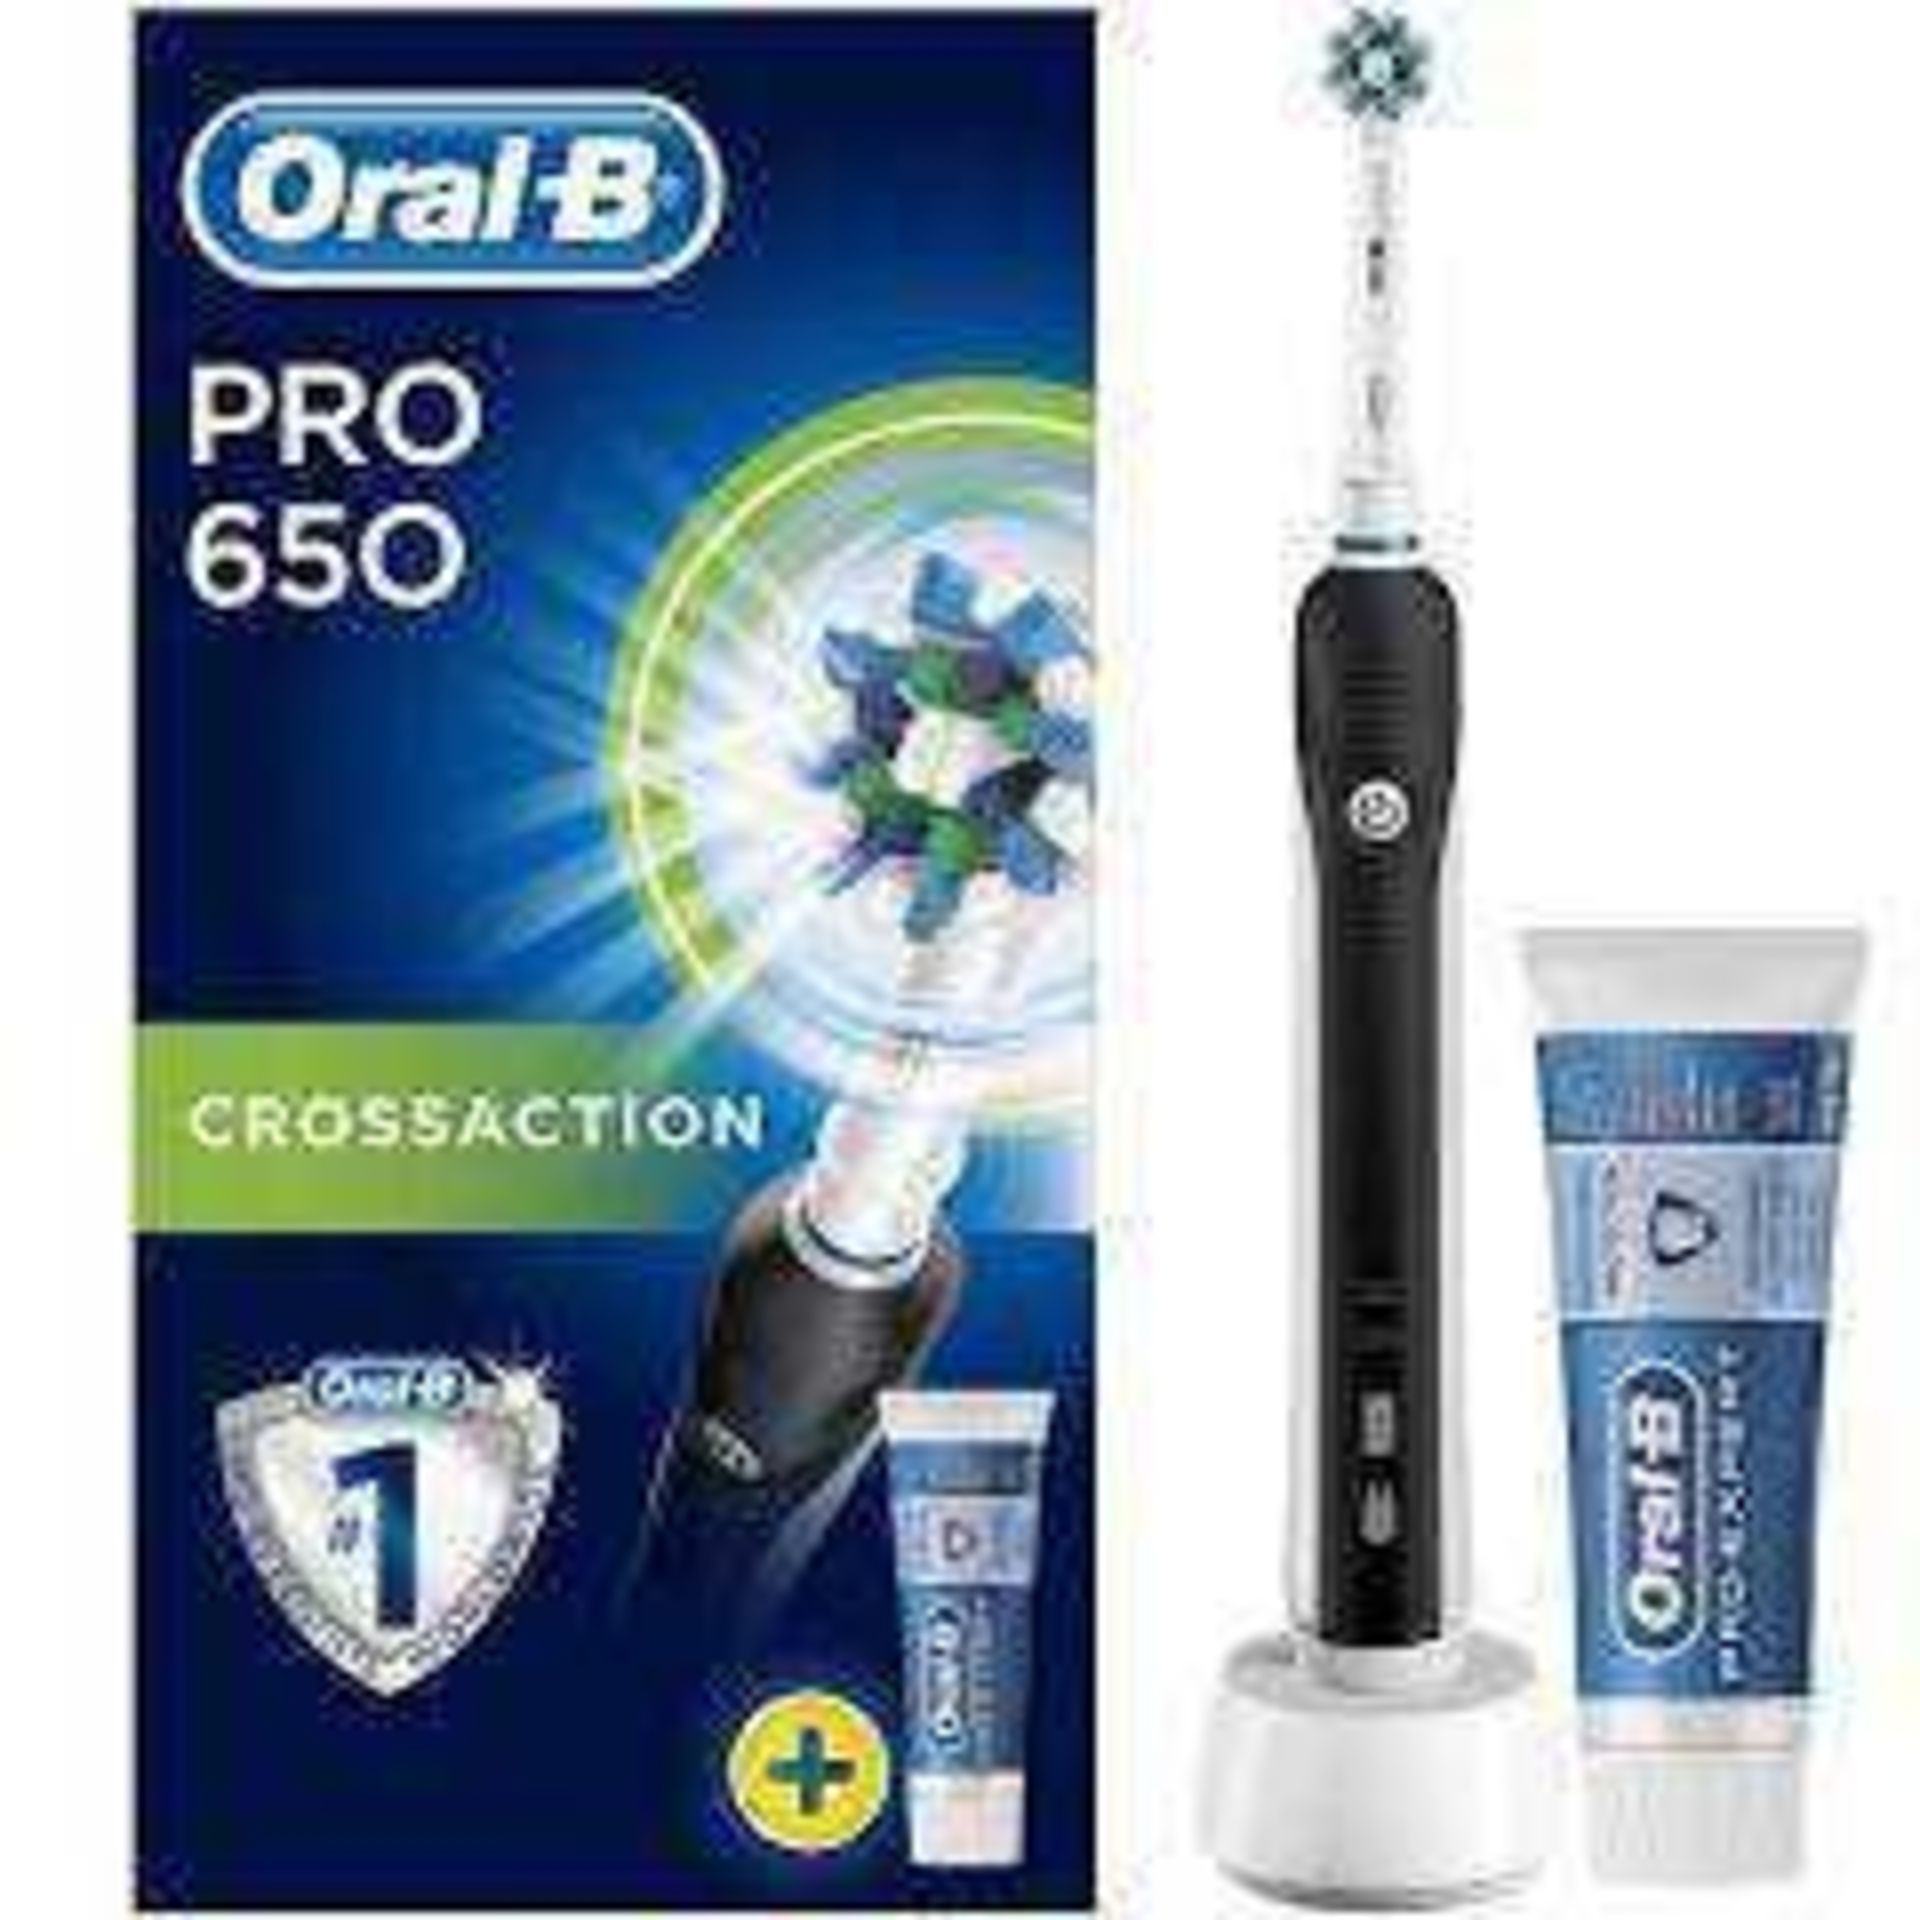 Combined RRP £180 Lot To Contain 3 Boxed Oral B Pr - Image 2 of 3